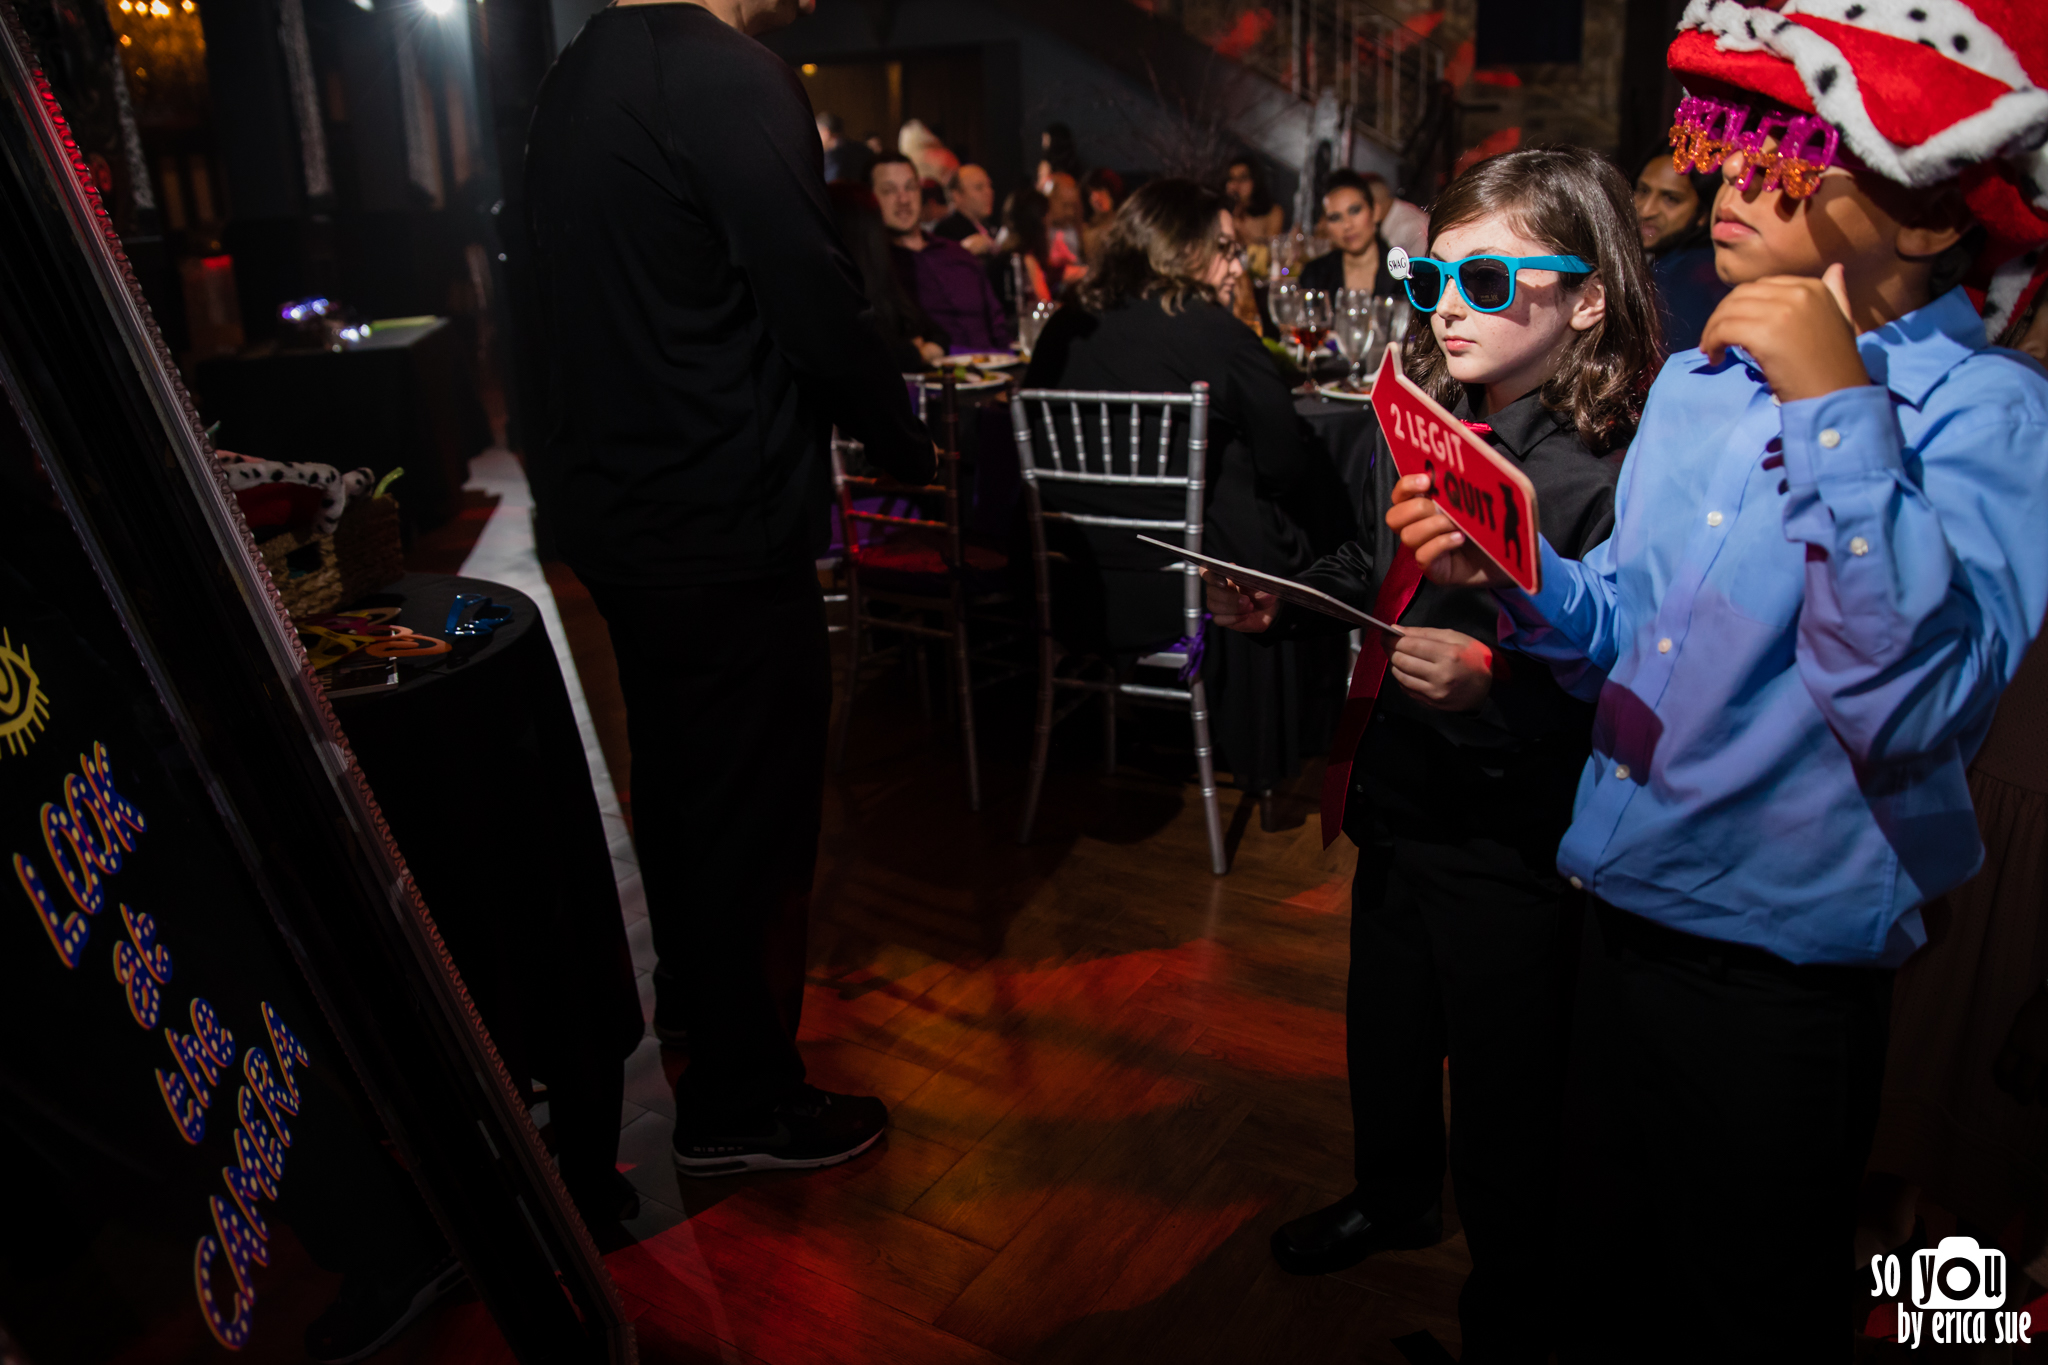 bat-mitzvah-photography-so-you-by-erica-sue-venue-ft-lauderdale-9541.jpg